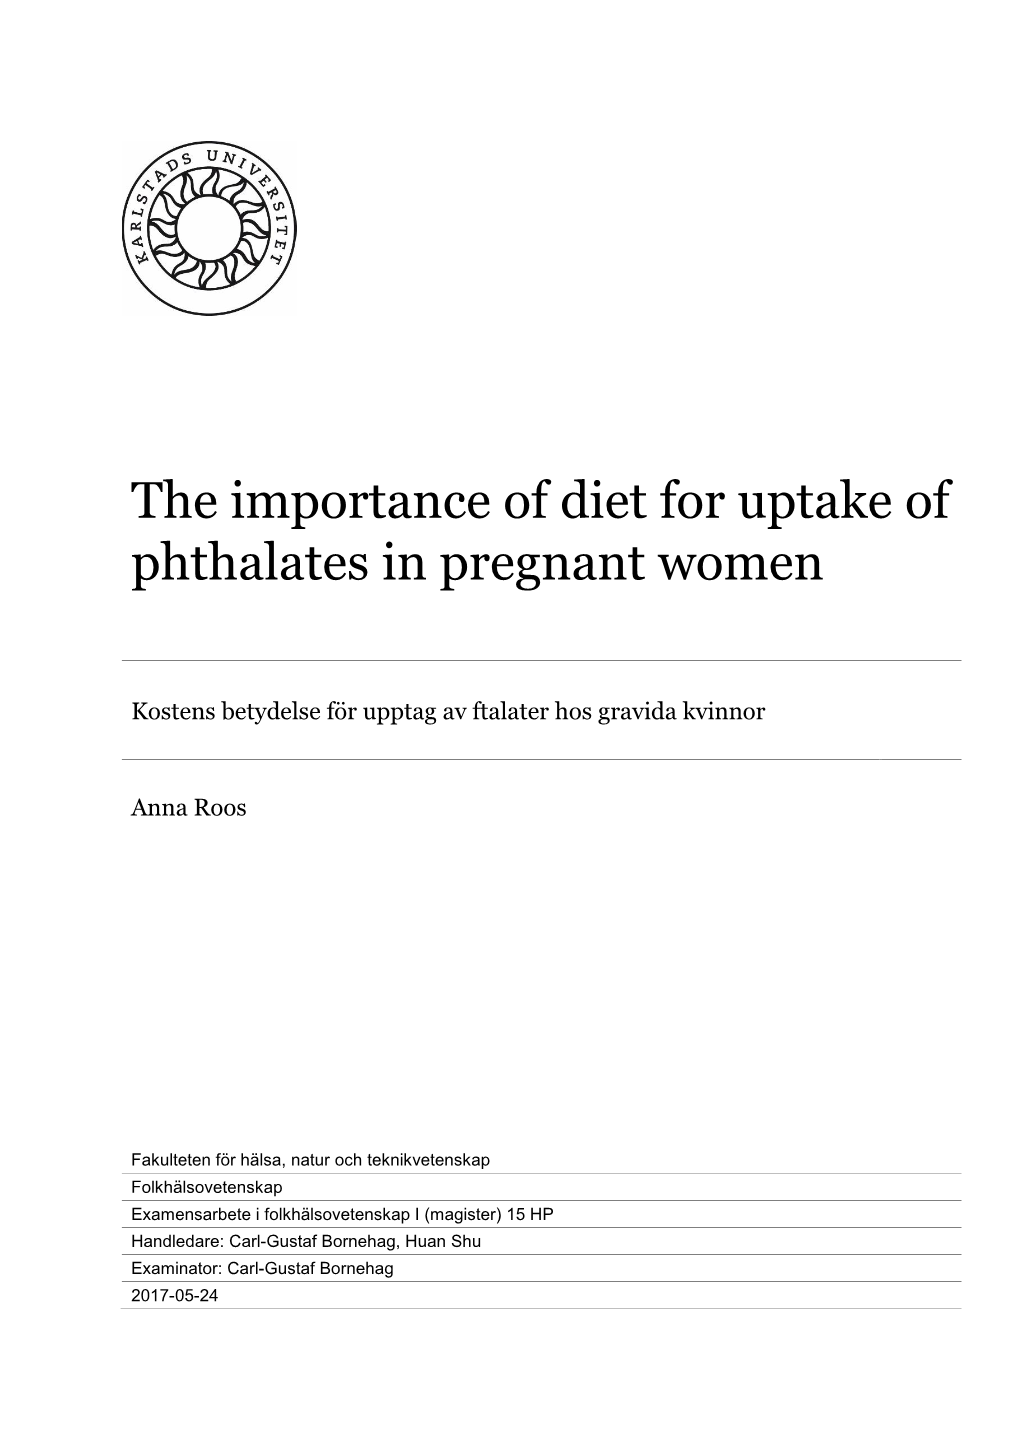 The Importance of Diet for Uptake of Phthalates in Pregnant Women